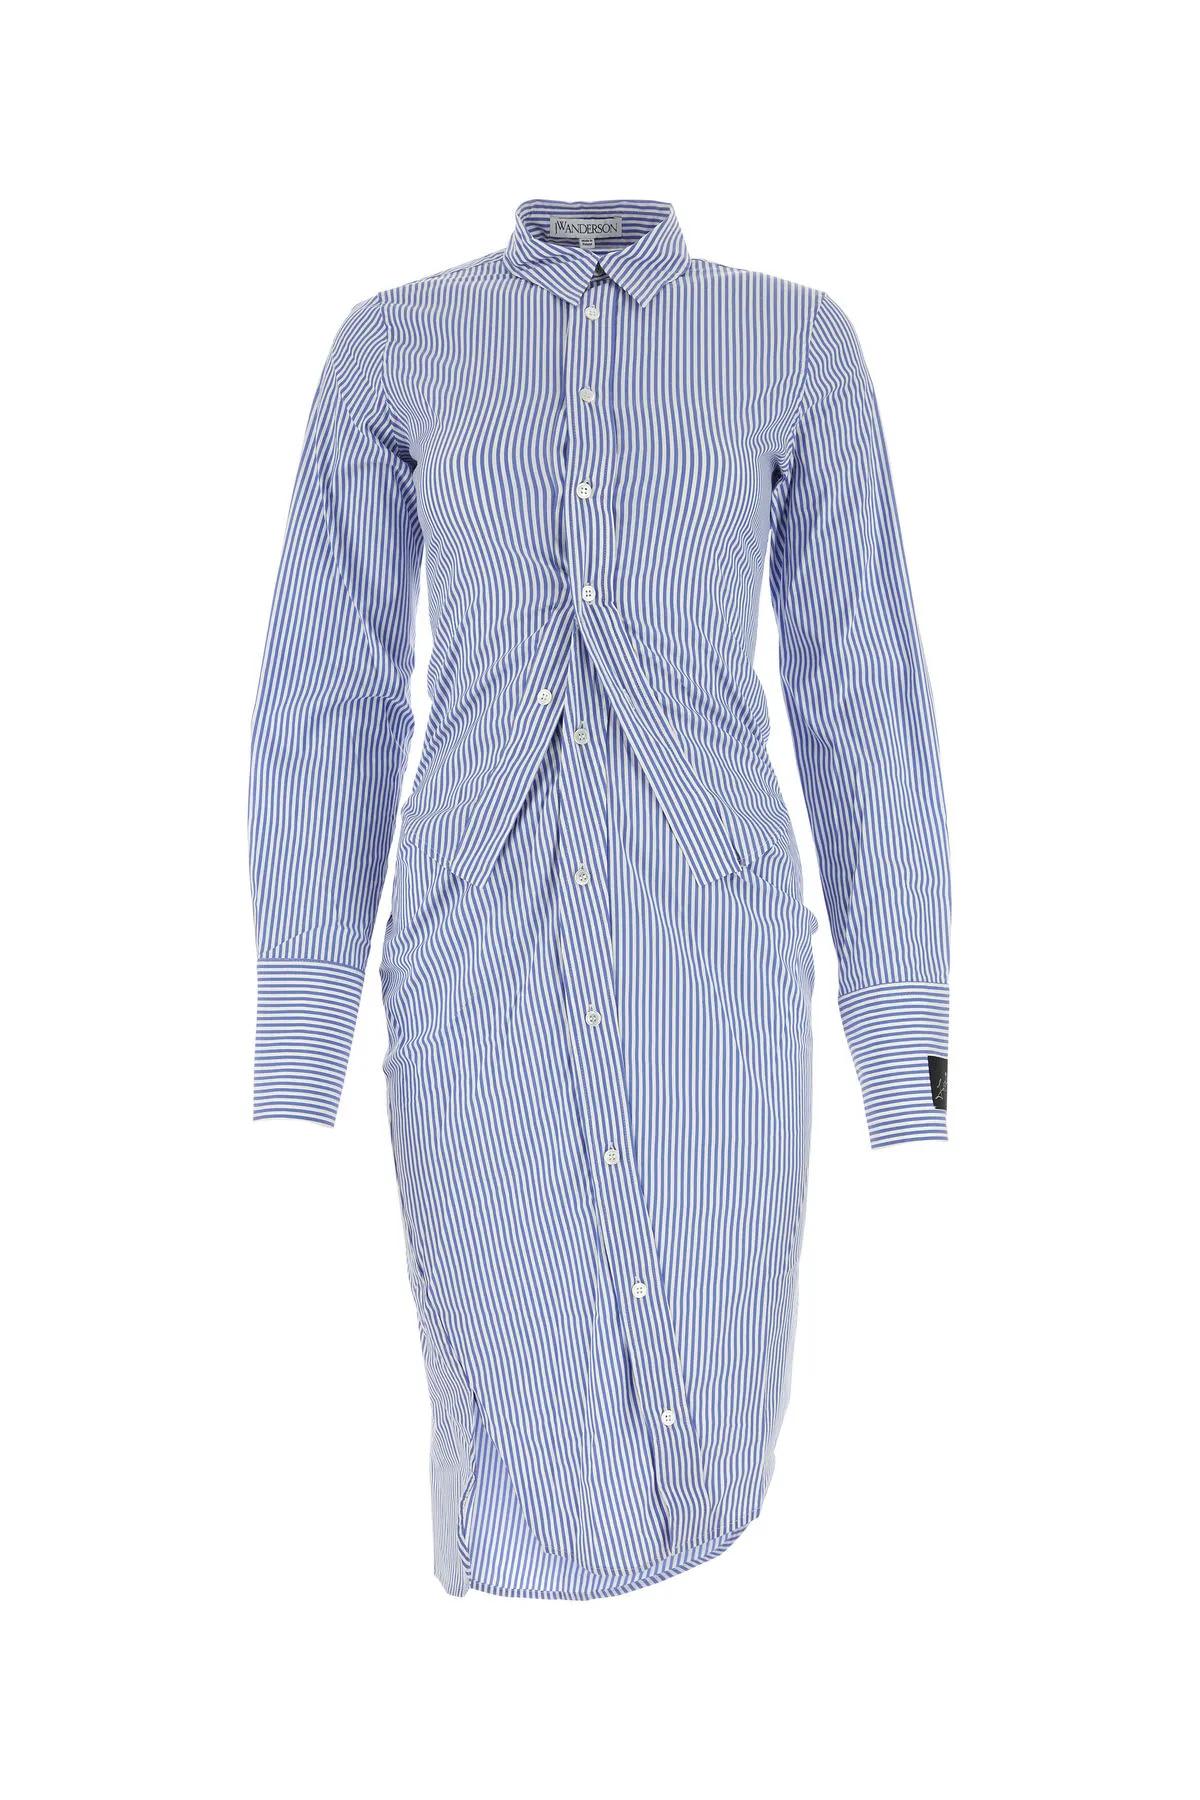 Shop Jw Anderson Printed Stretch Cotton Shirt Dress In Light Blue White